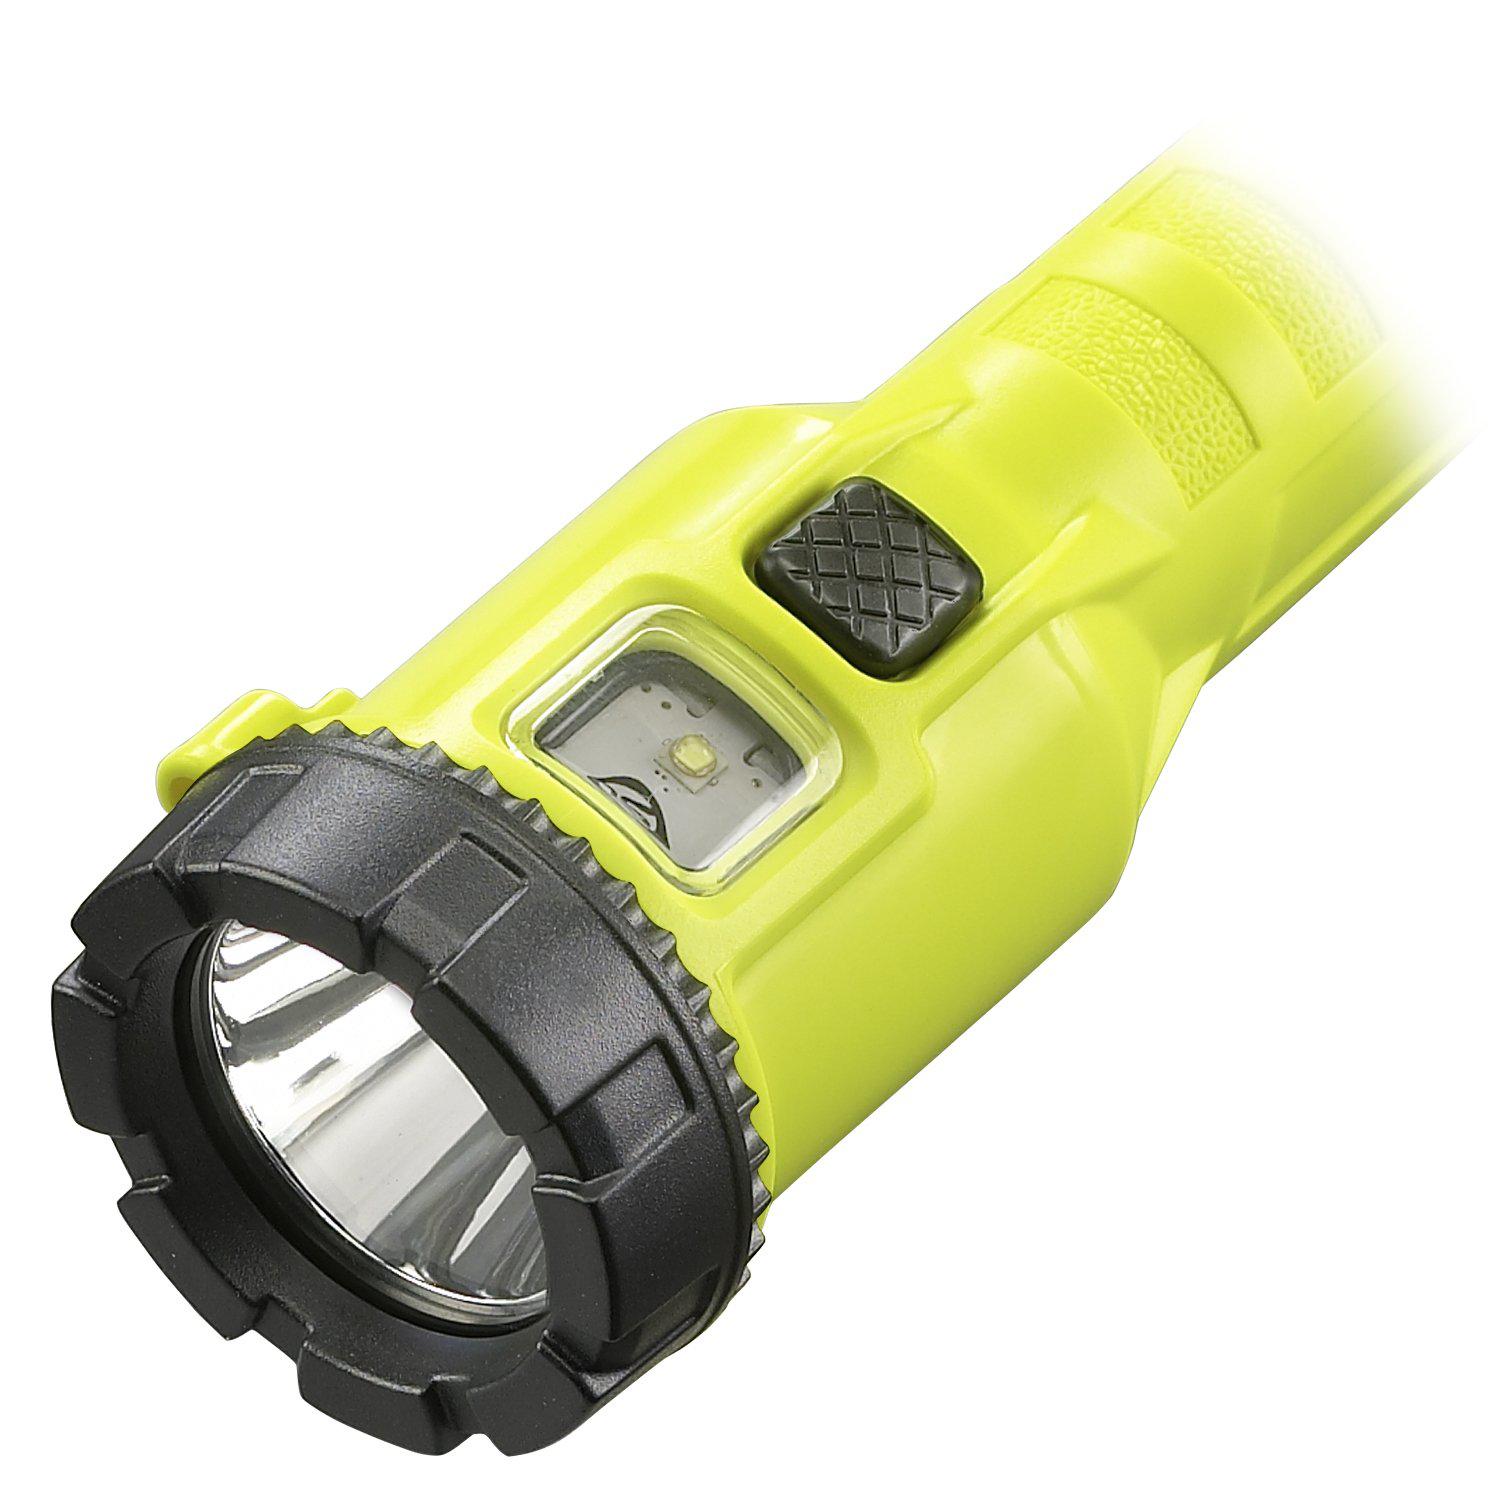 streamlight 68780 dualie 3aa 245-lumen magnetic intrinsically safe industrial flashlight with spot/flood without batteries, y